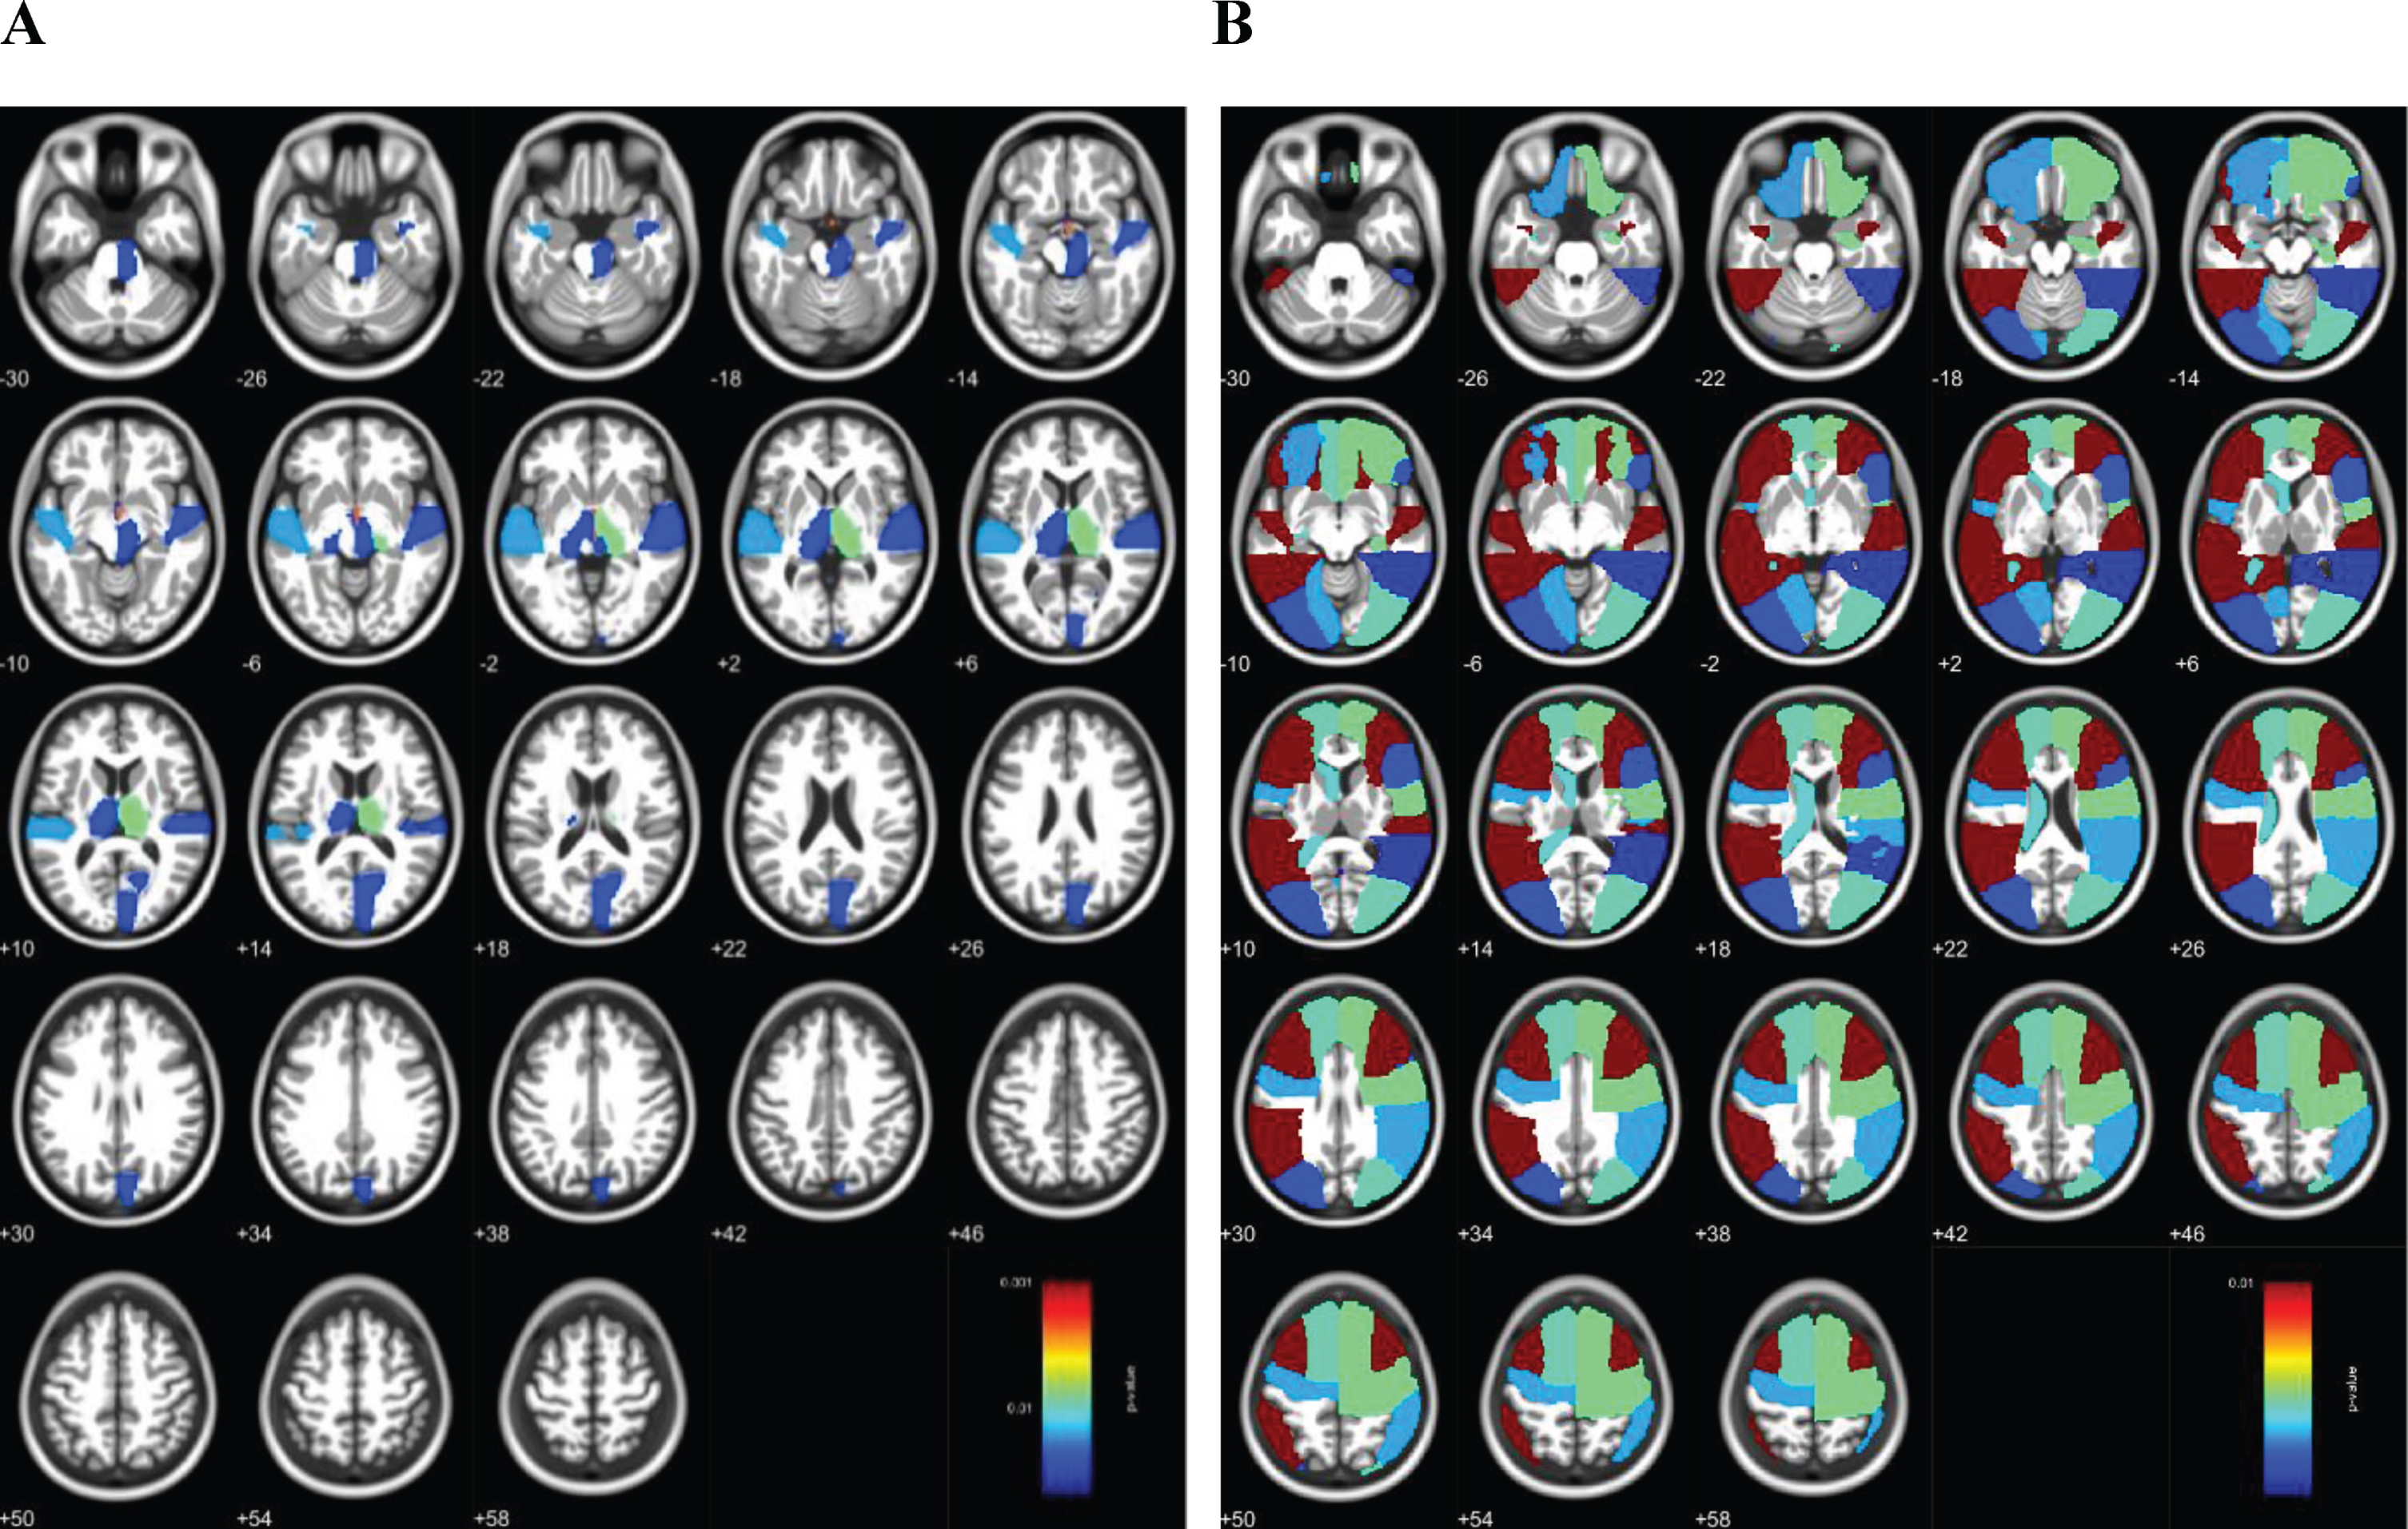 Voxel-wise comparisons of regional grey matter and white matter volumes between people with and without amnestic mild cognitive impairment. Regional volumes were lower in the aMCI group (n = 42) compared with normal controls (n = 138) after controlling for age, sex, education, occupation, ever smoking, alcohol intake, physical exercise, hypertension, diabetes, hyperlipidemia, total intracranial volume, and MRI centers. A) Regional GM volume (e.g., bilateral temporal gyri and thalamus) was reduced in the aMCI group compared with normal controls after FDR correction. B) Regional WM volume (e.g., bilateral frontal and superior temporal areas) was reduced in the aMCI group compared with cognitively normal controls.